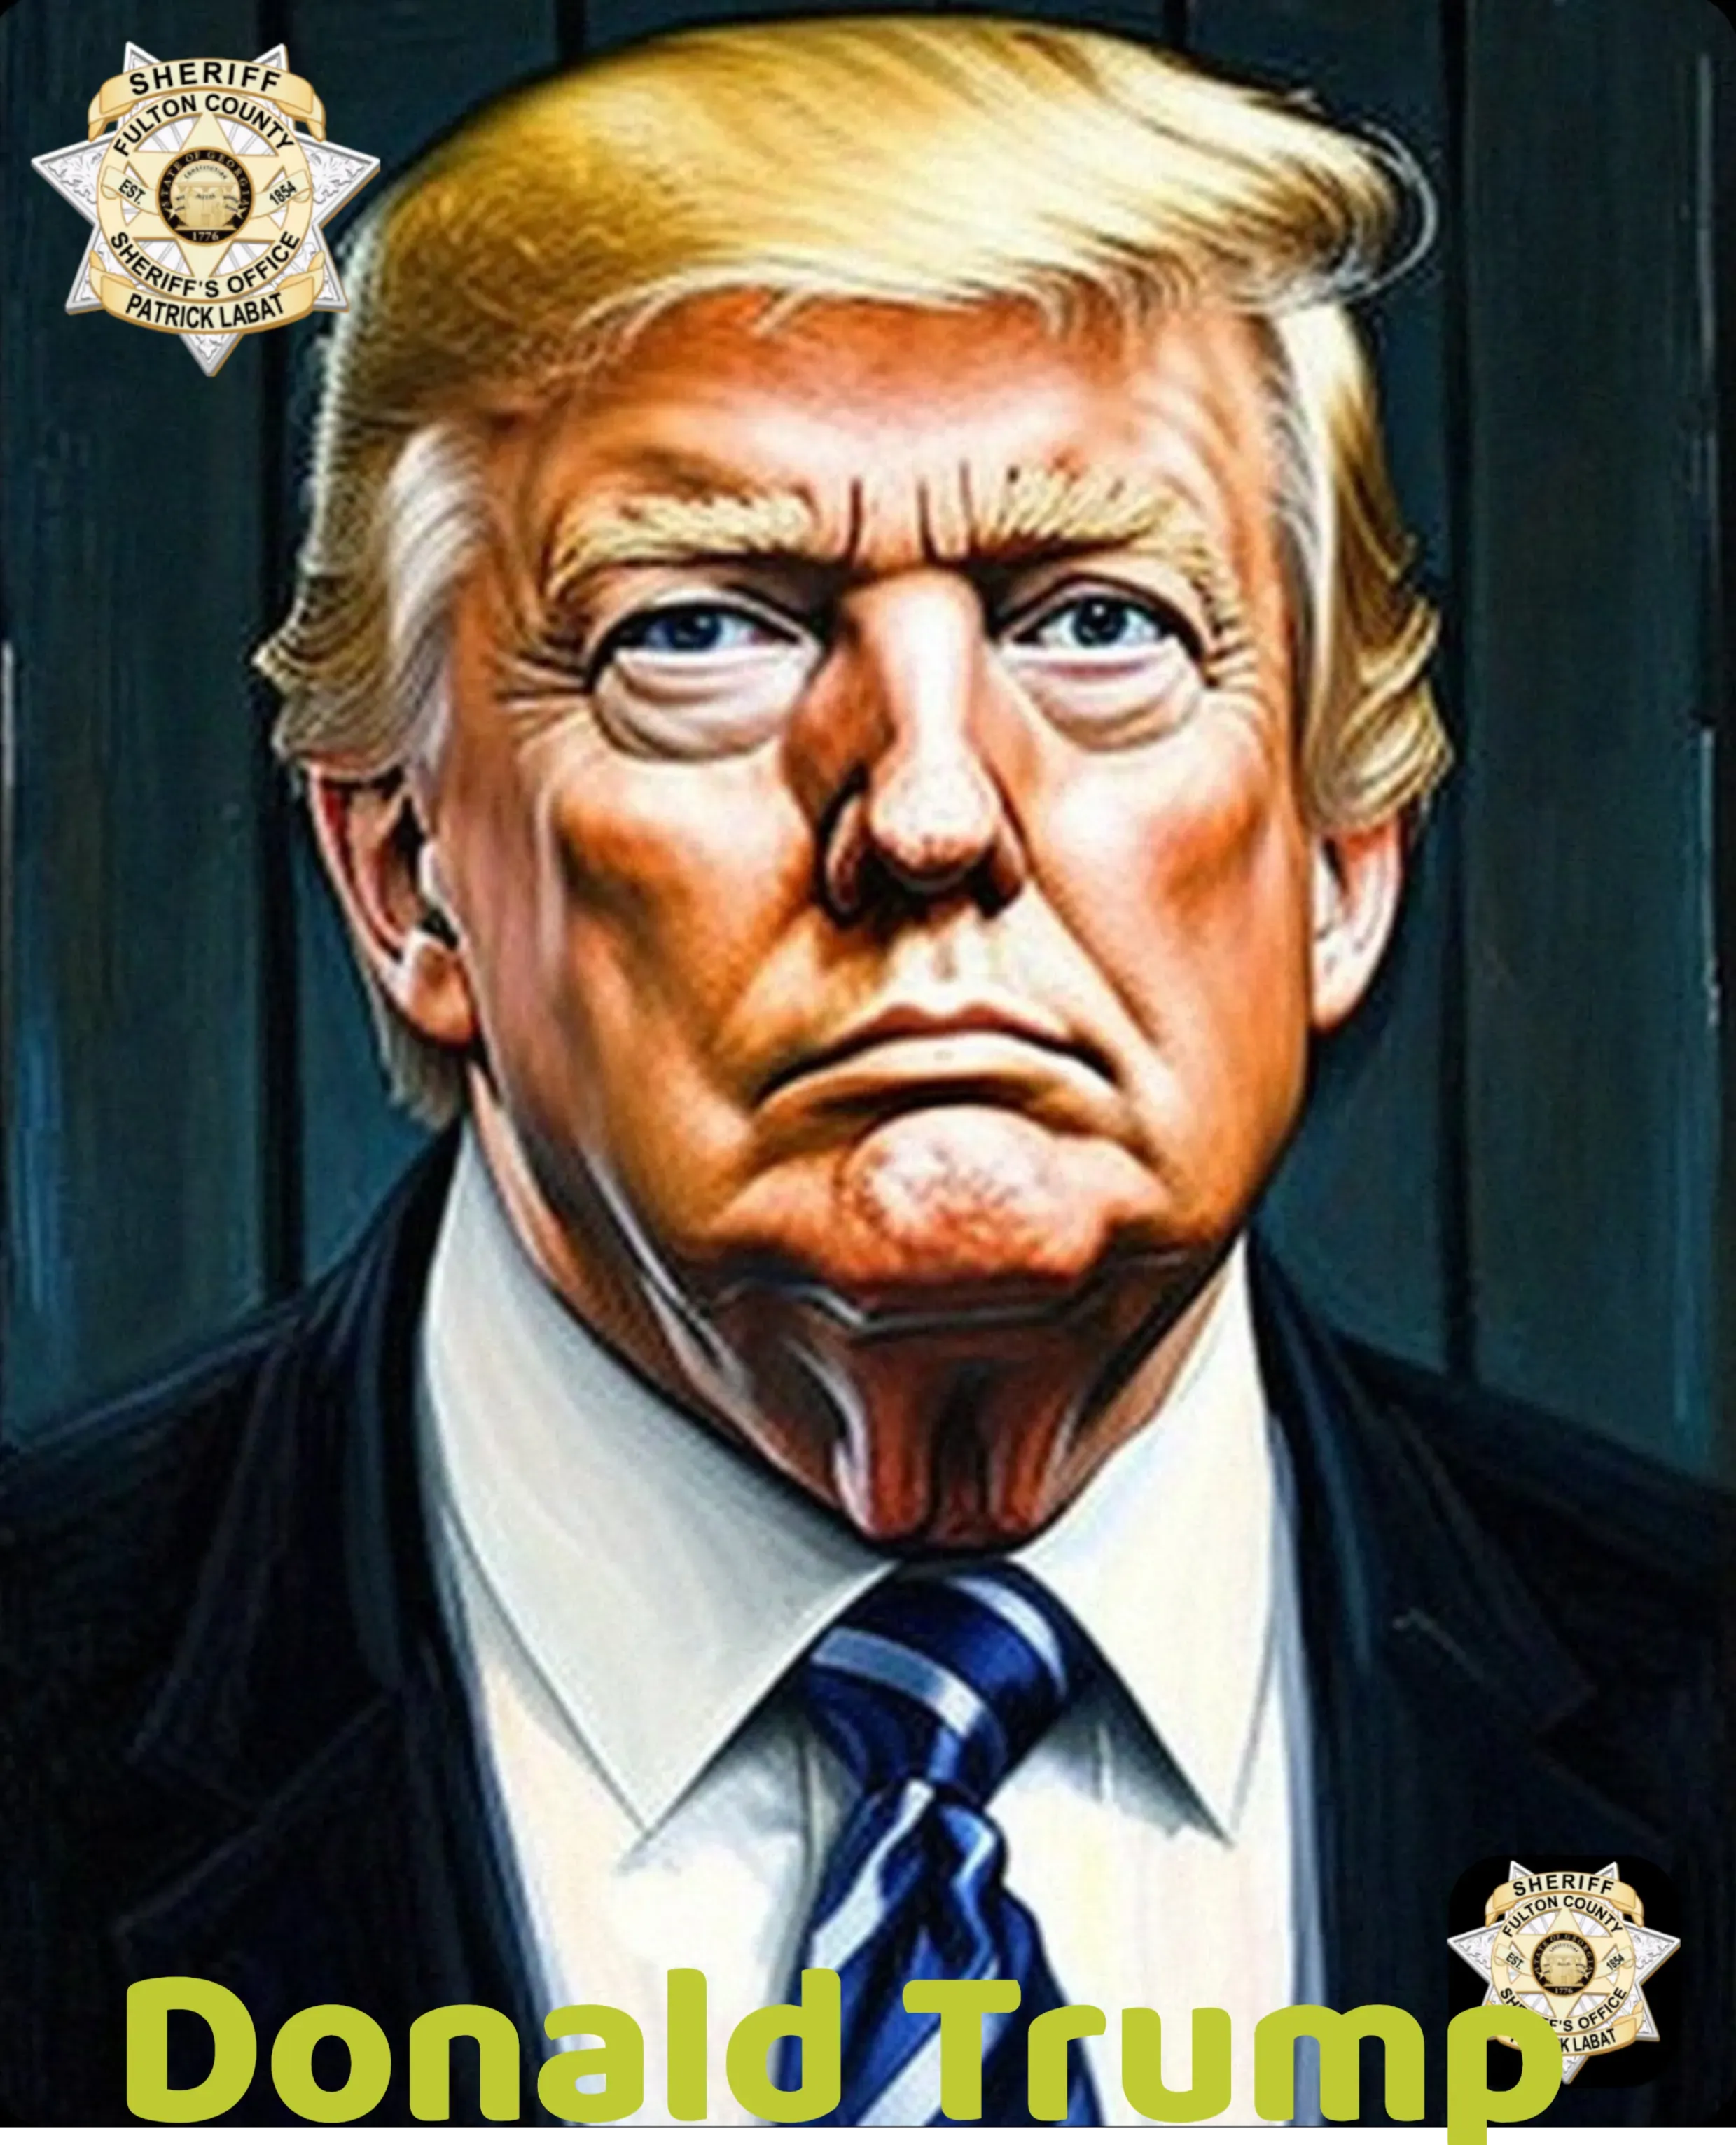 Click on the button below to download your FREE Trump AI Mugshot Poster